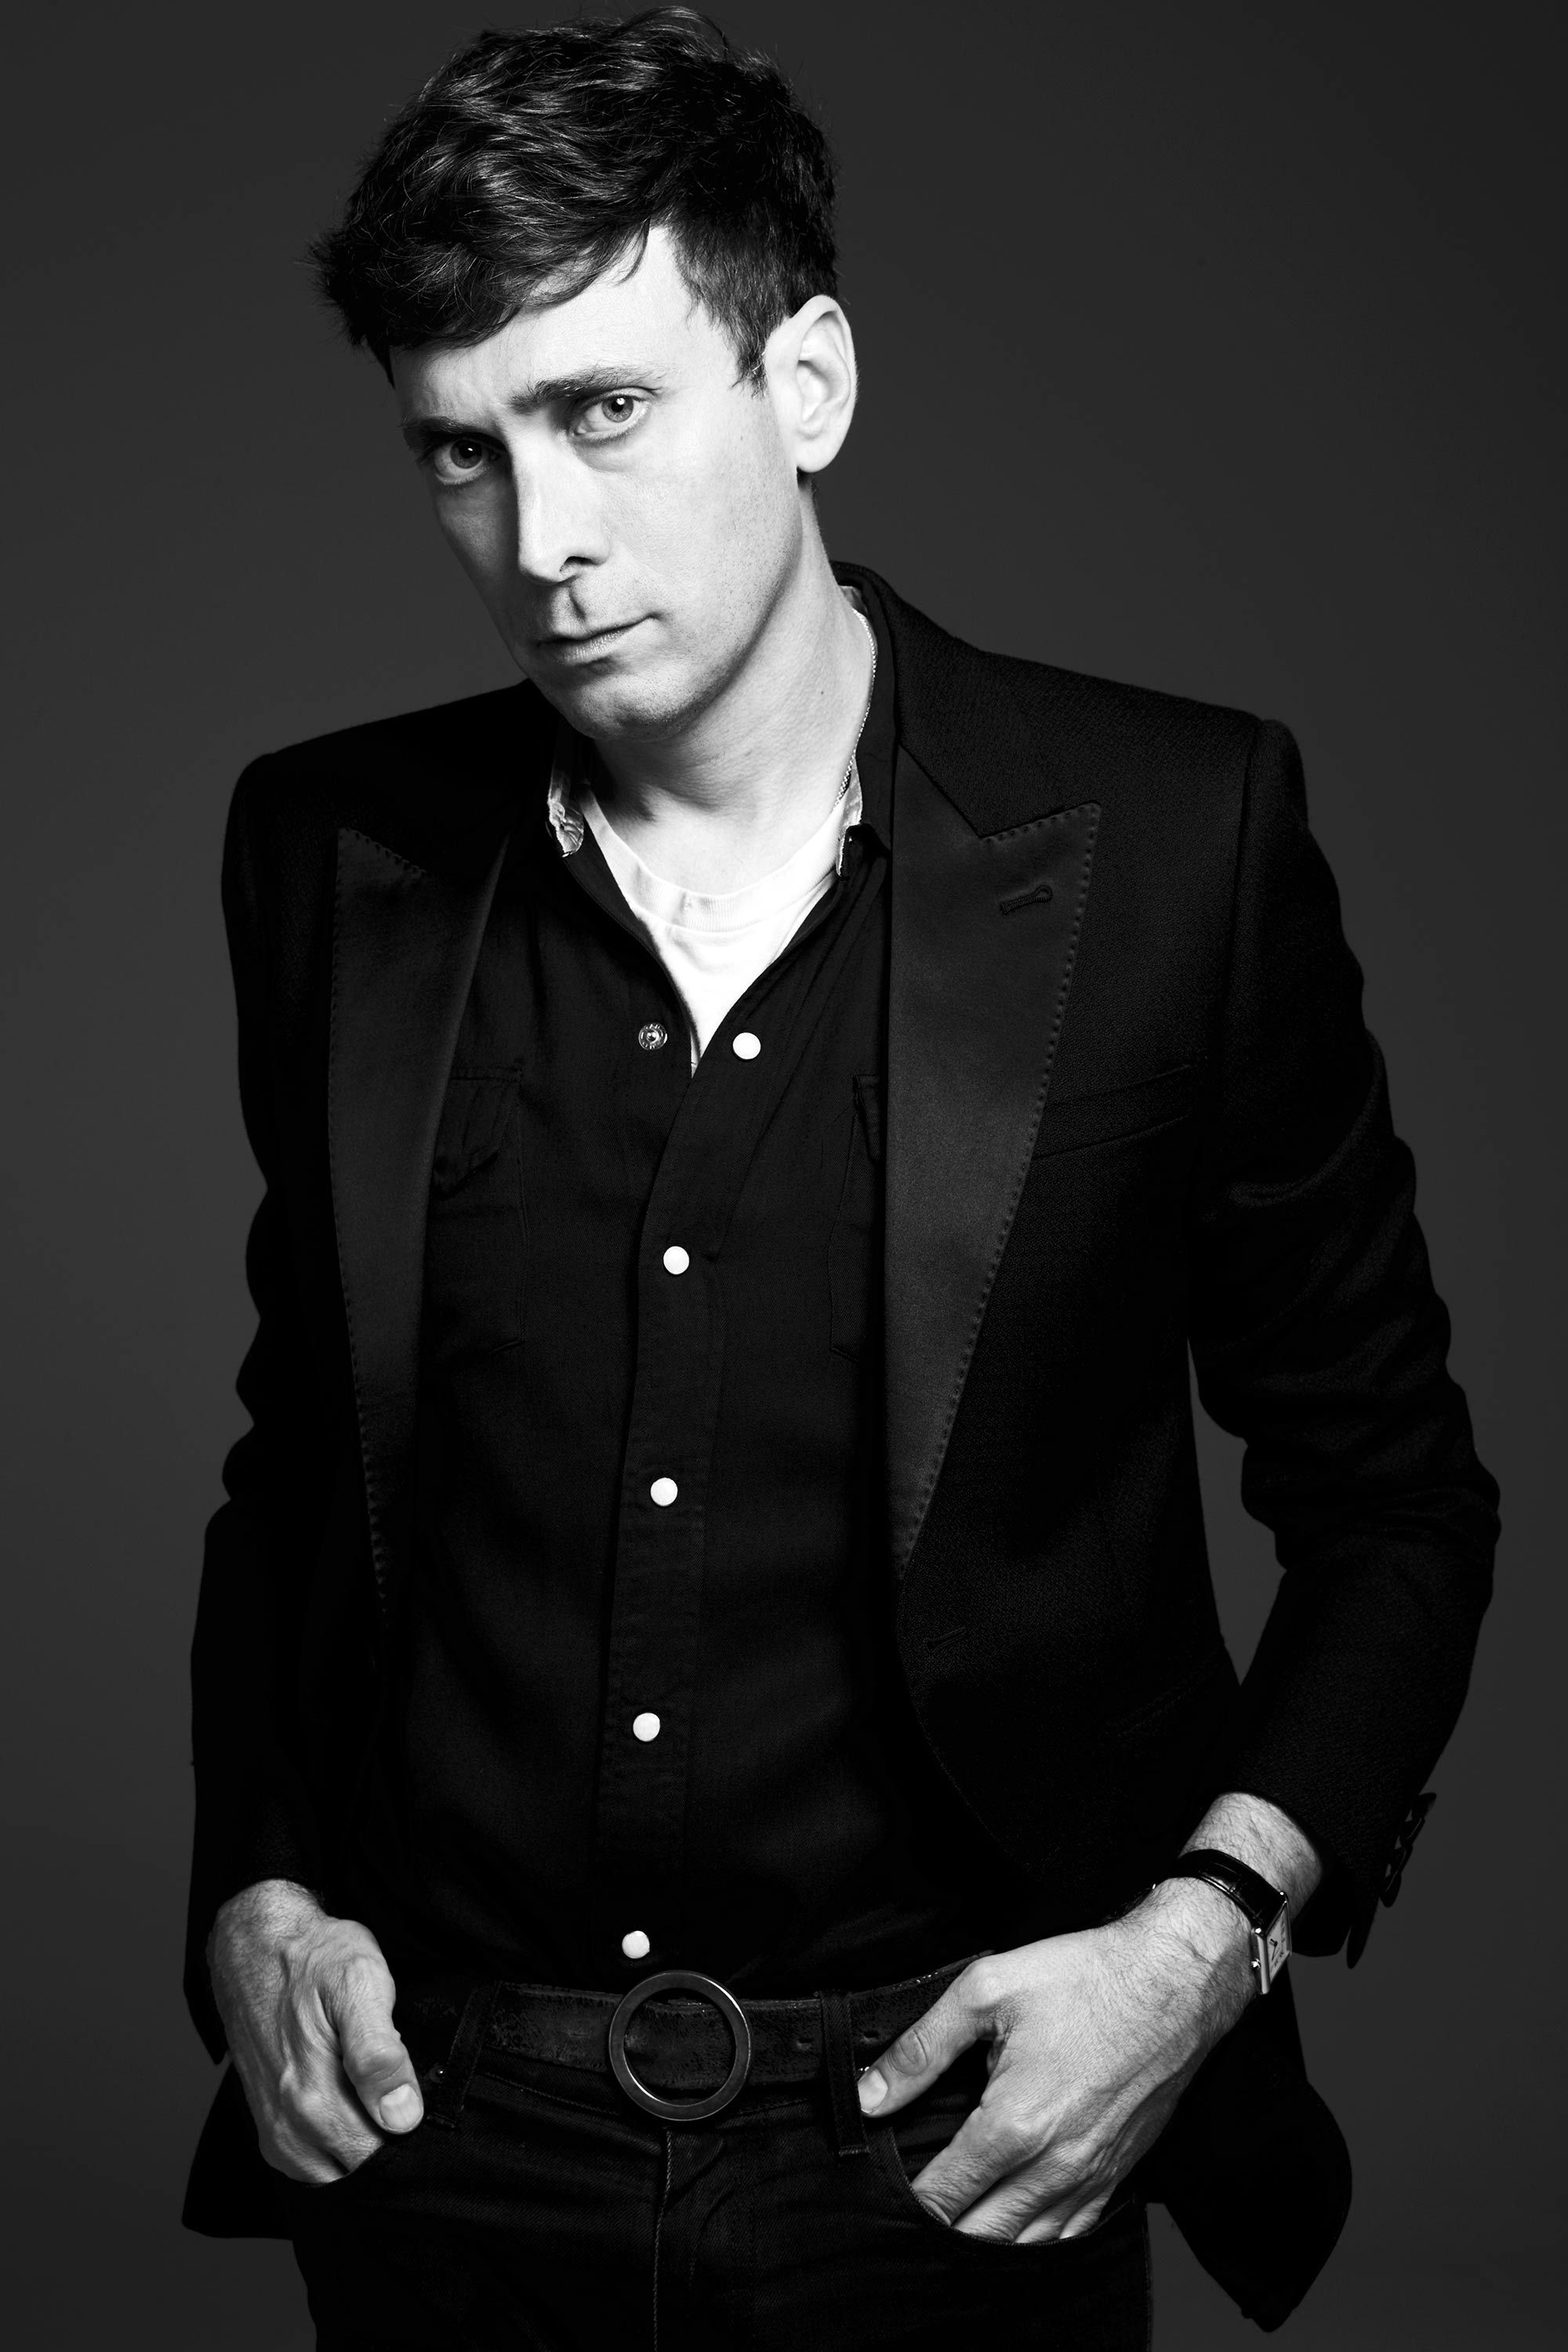 Hedi Slimane's controversial yet successful rebranding of the